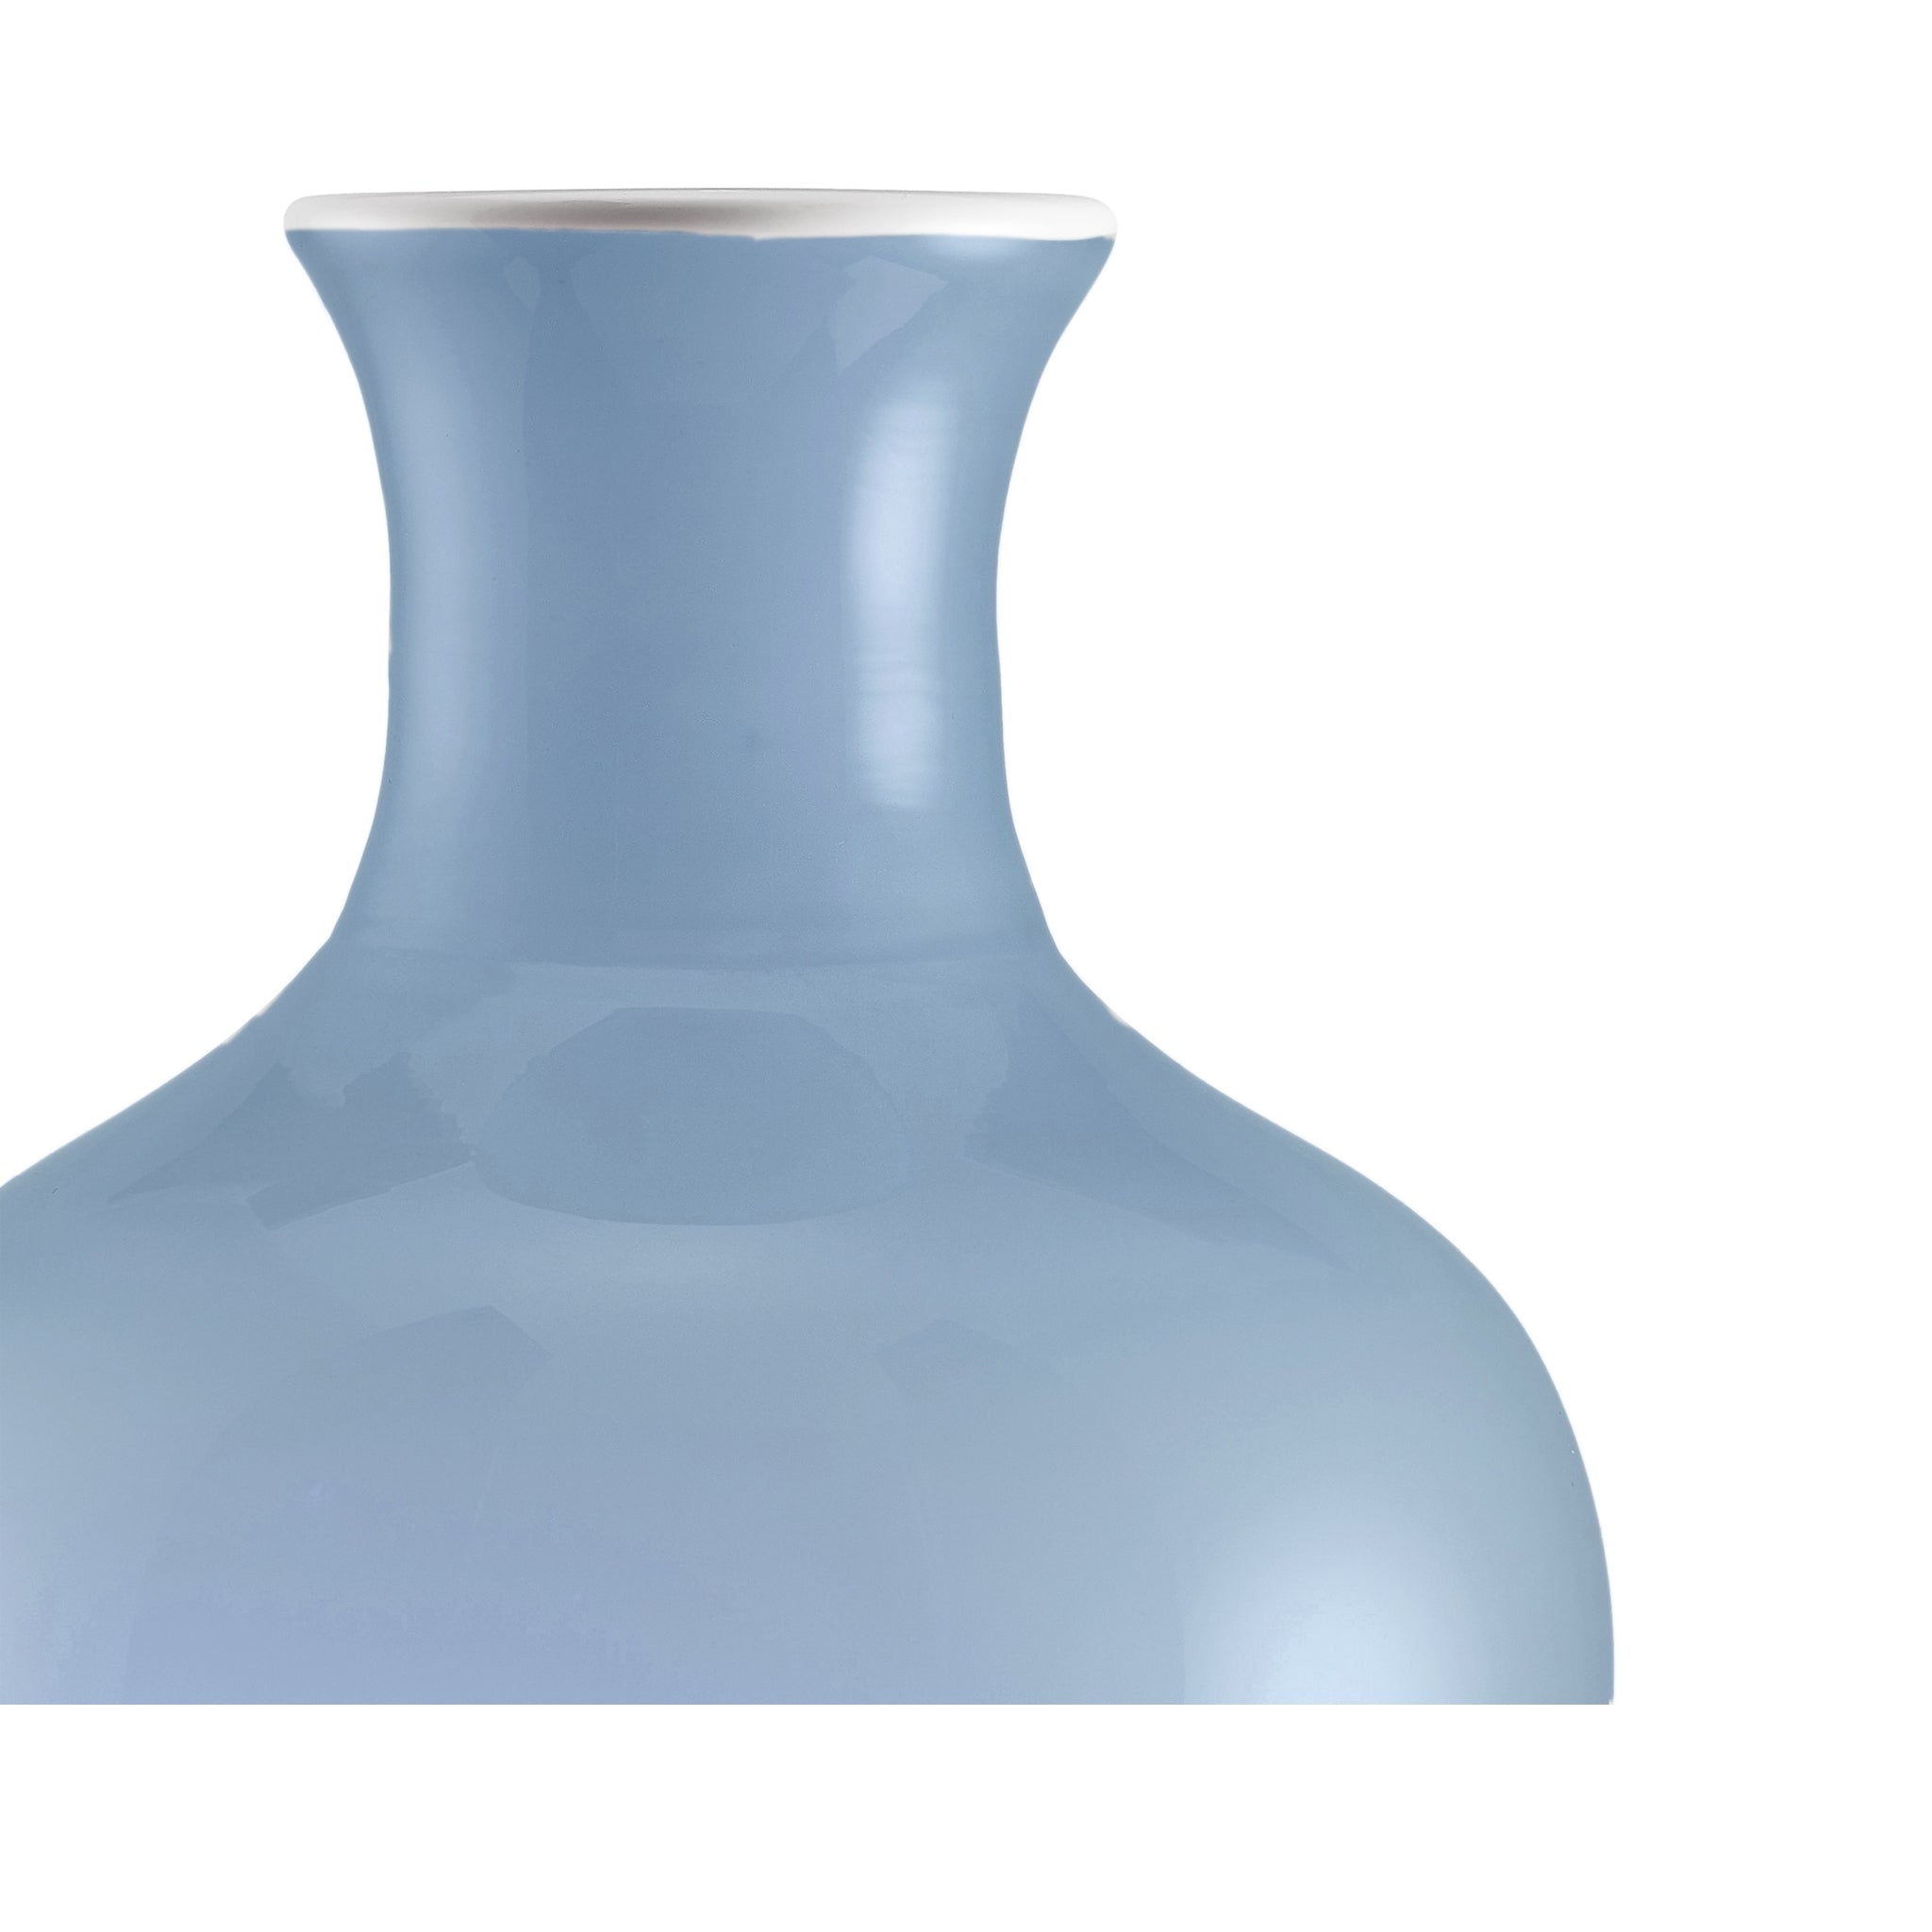 Handblown Glass Bumba Bedside Carafe and Glass Set in Powder Blue, 0.5L